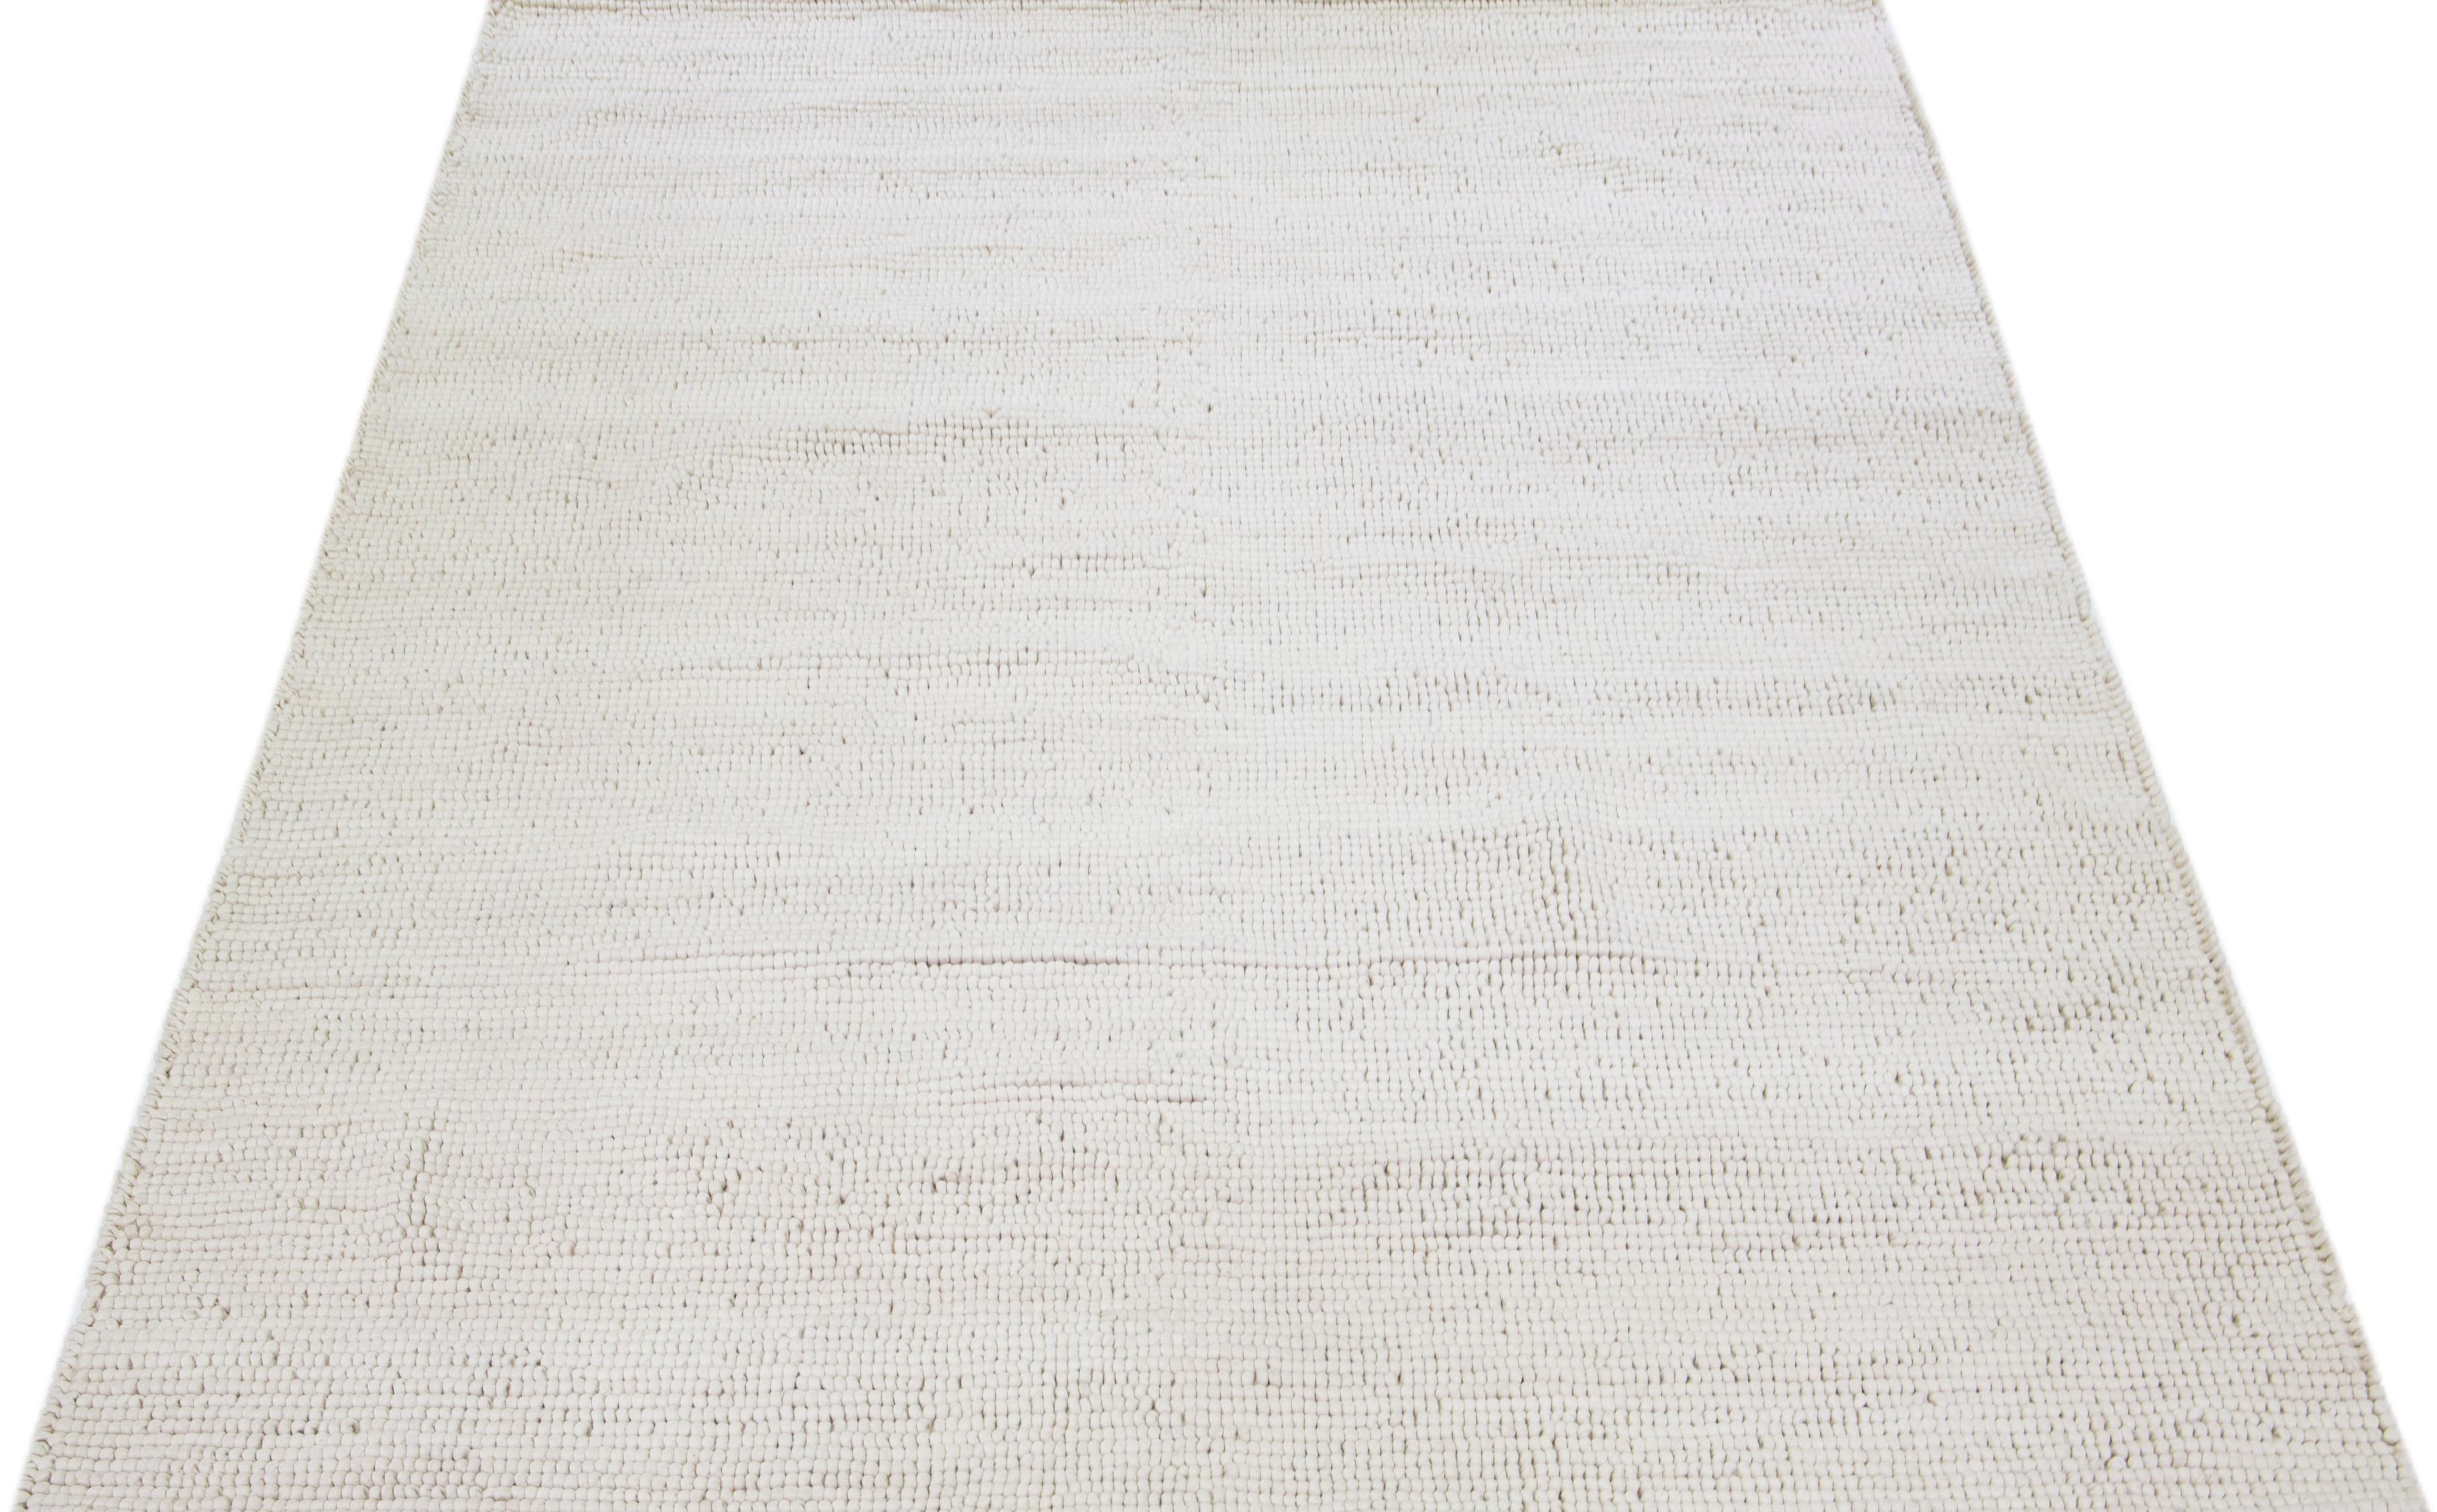 This beautiful Felt hand-woven wool rug is part of our Westport Collection with a natural Ivory color field and features an all-over pebble design.

This rug measures: 10' x 14'.

Custom colors and sizes are available upon request.

